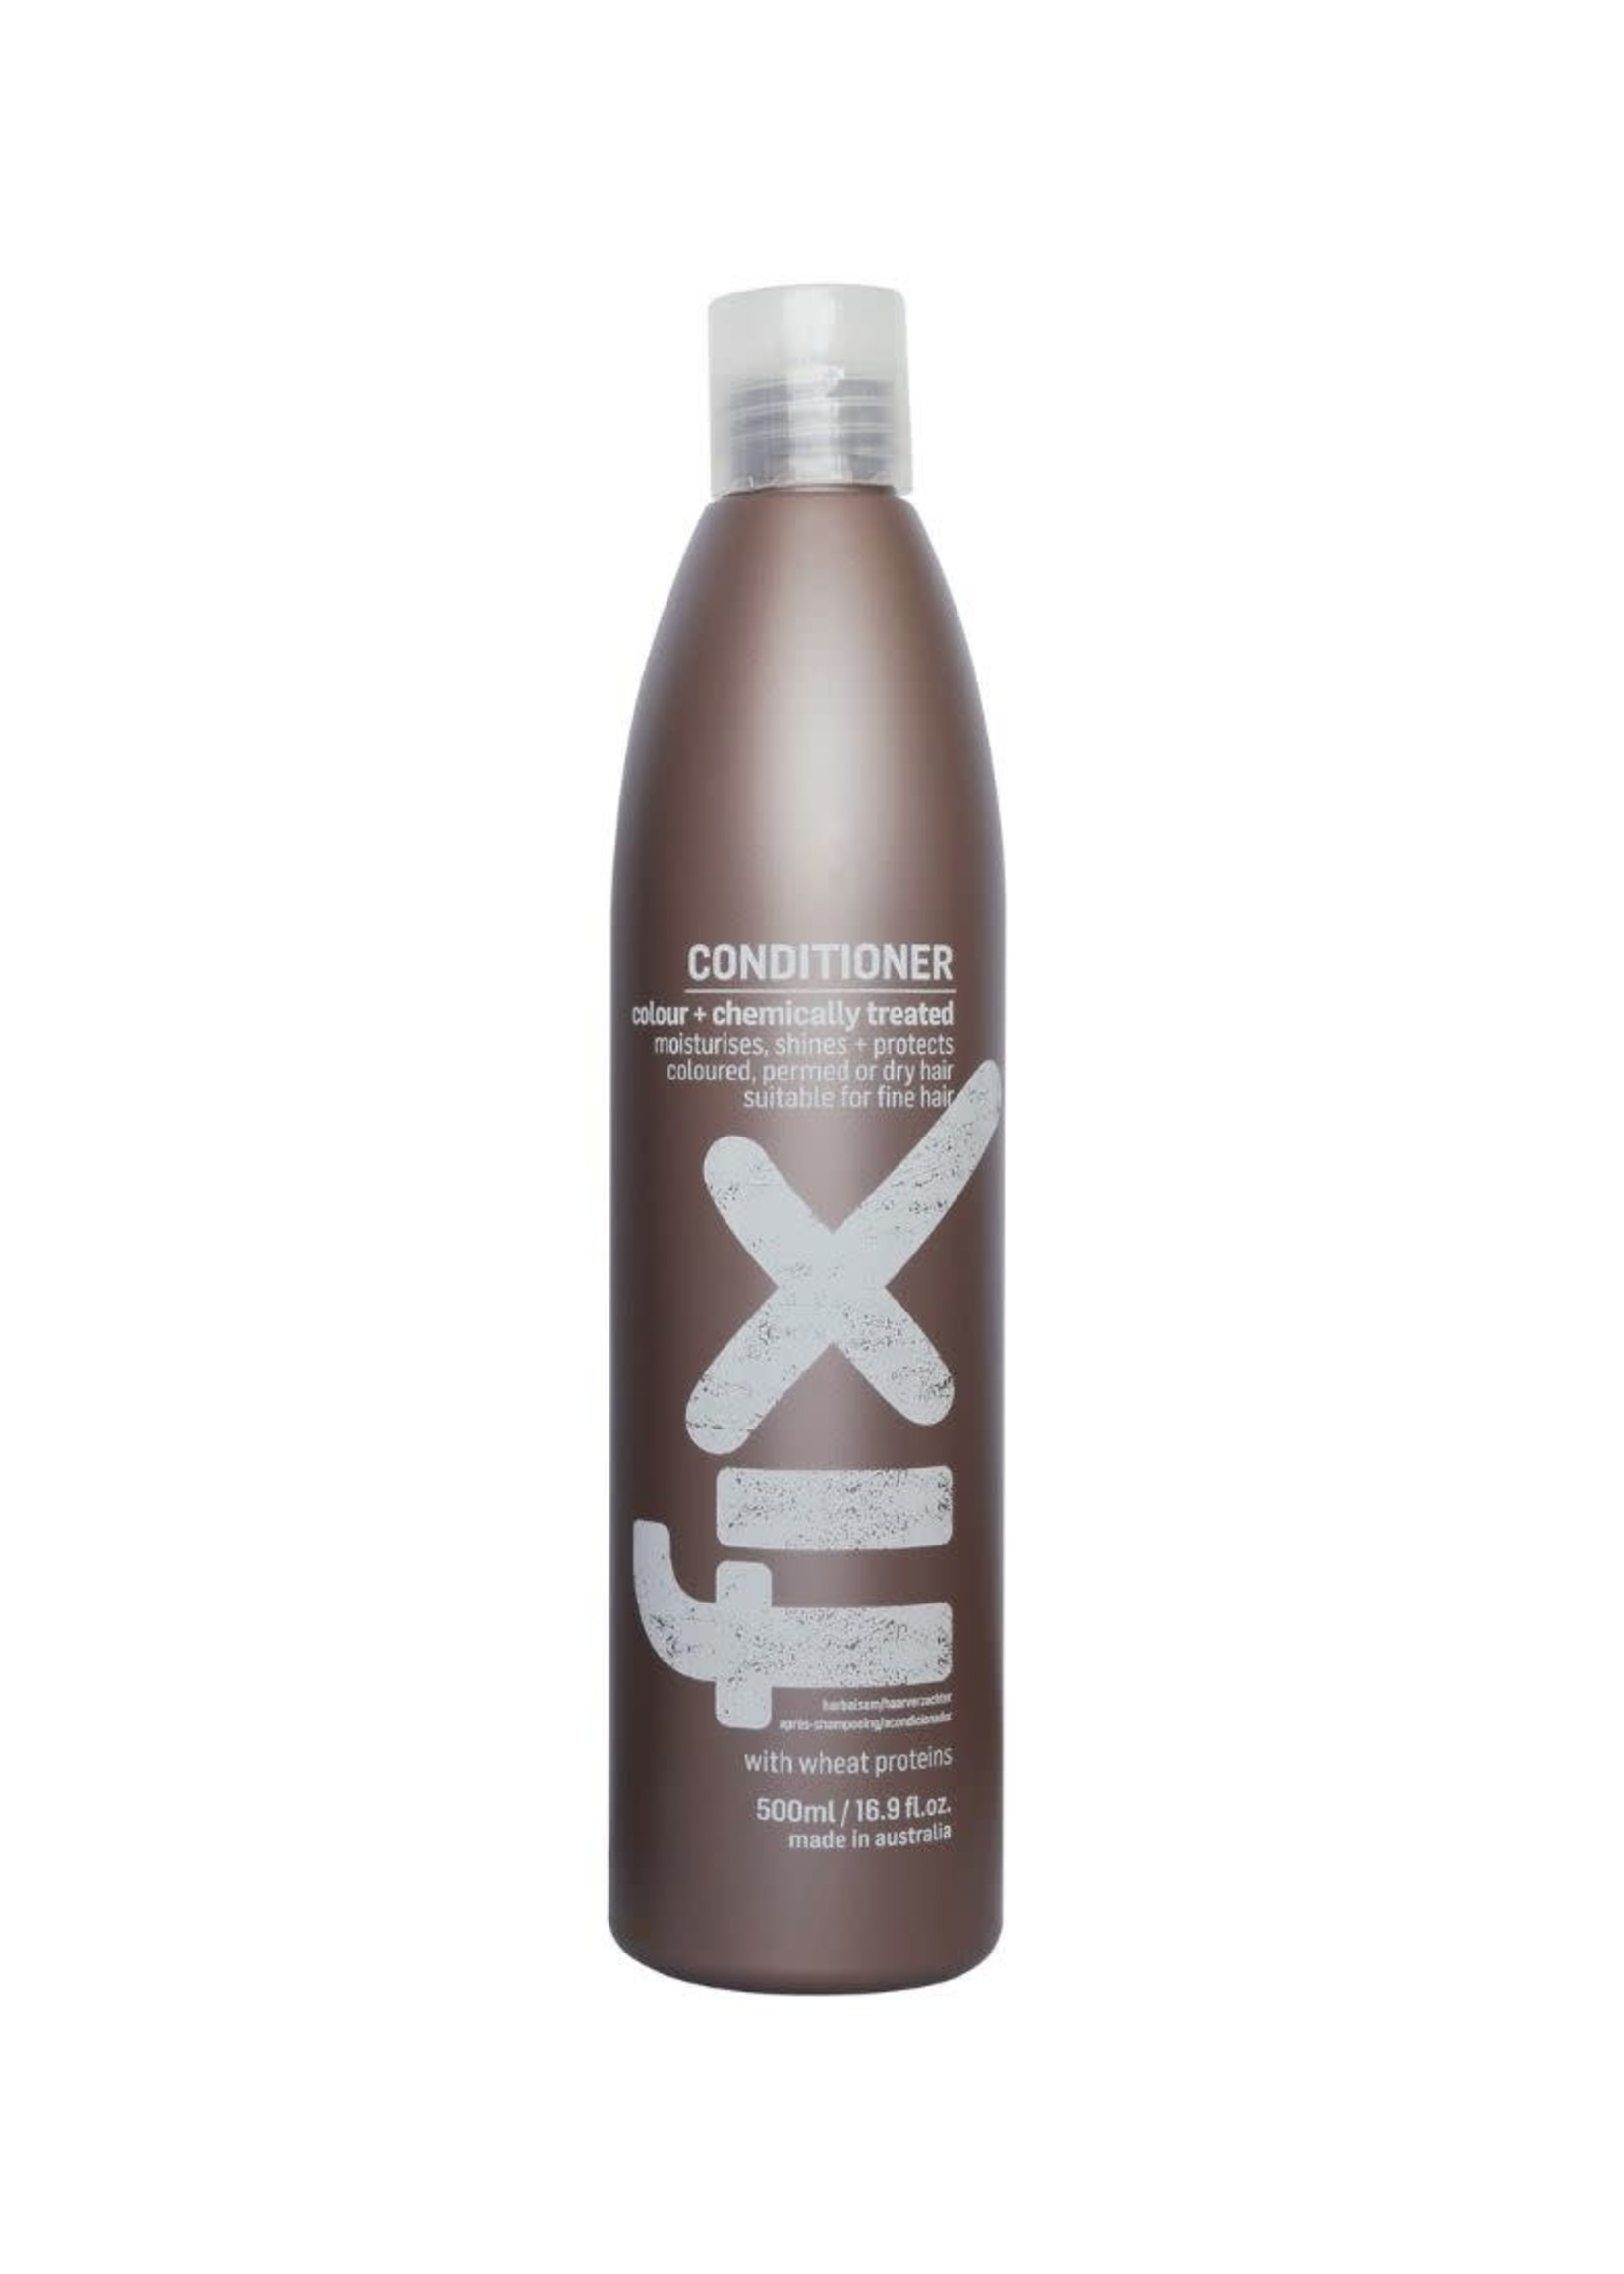 Fix Fix Colour + Chemically Treated Conditioner 500ml